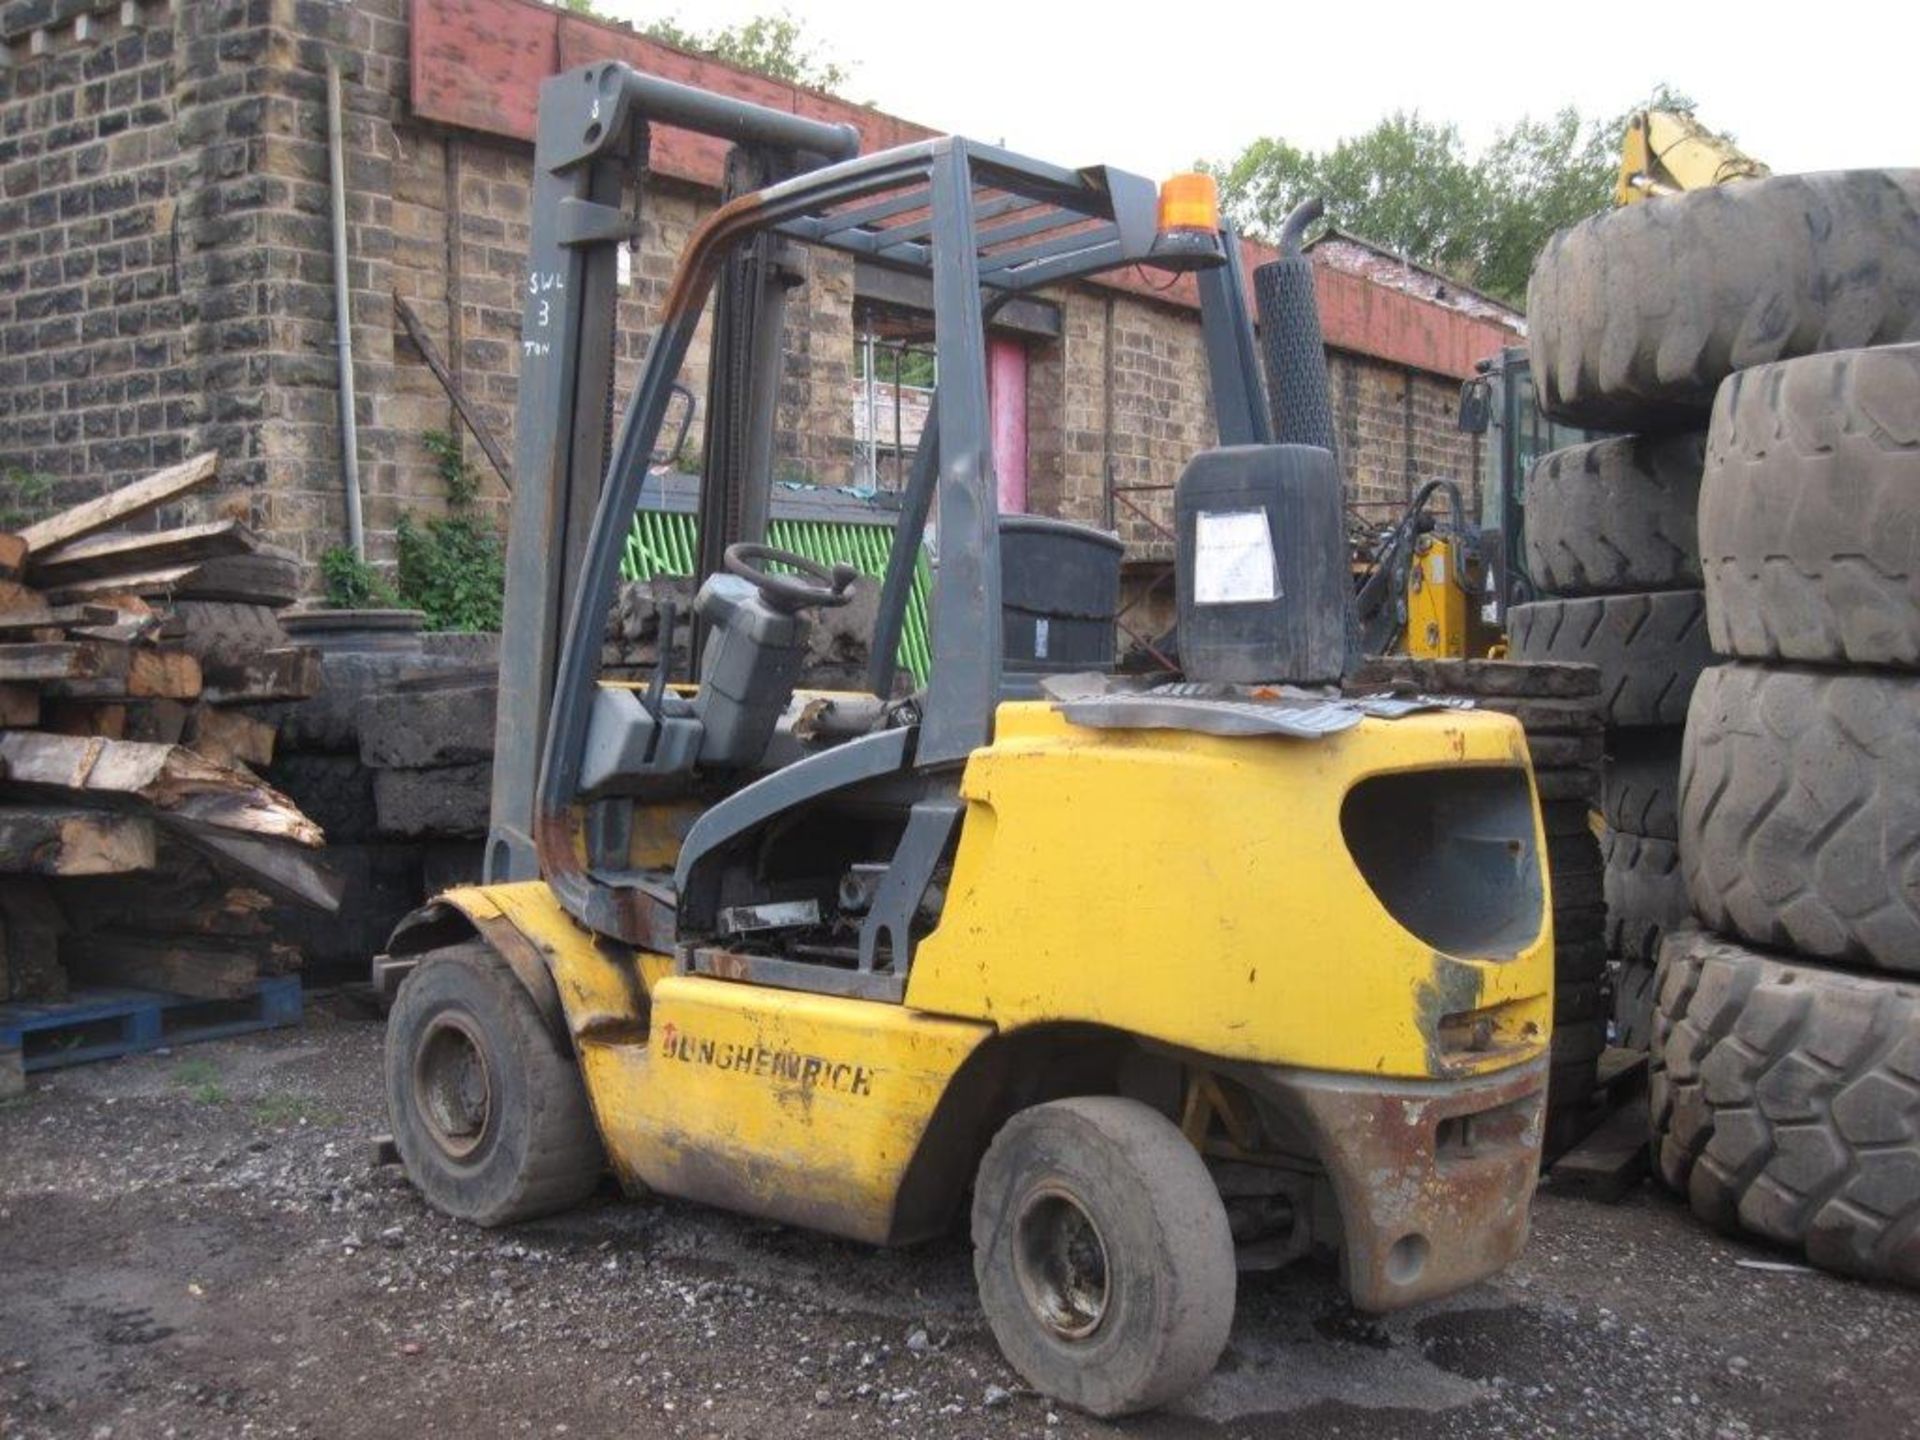 Jungheinrich Forklift 2002, Diesel, 3 tonne capacity, Perkins engine Starts, runs and drives but - Image 3 of 3